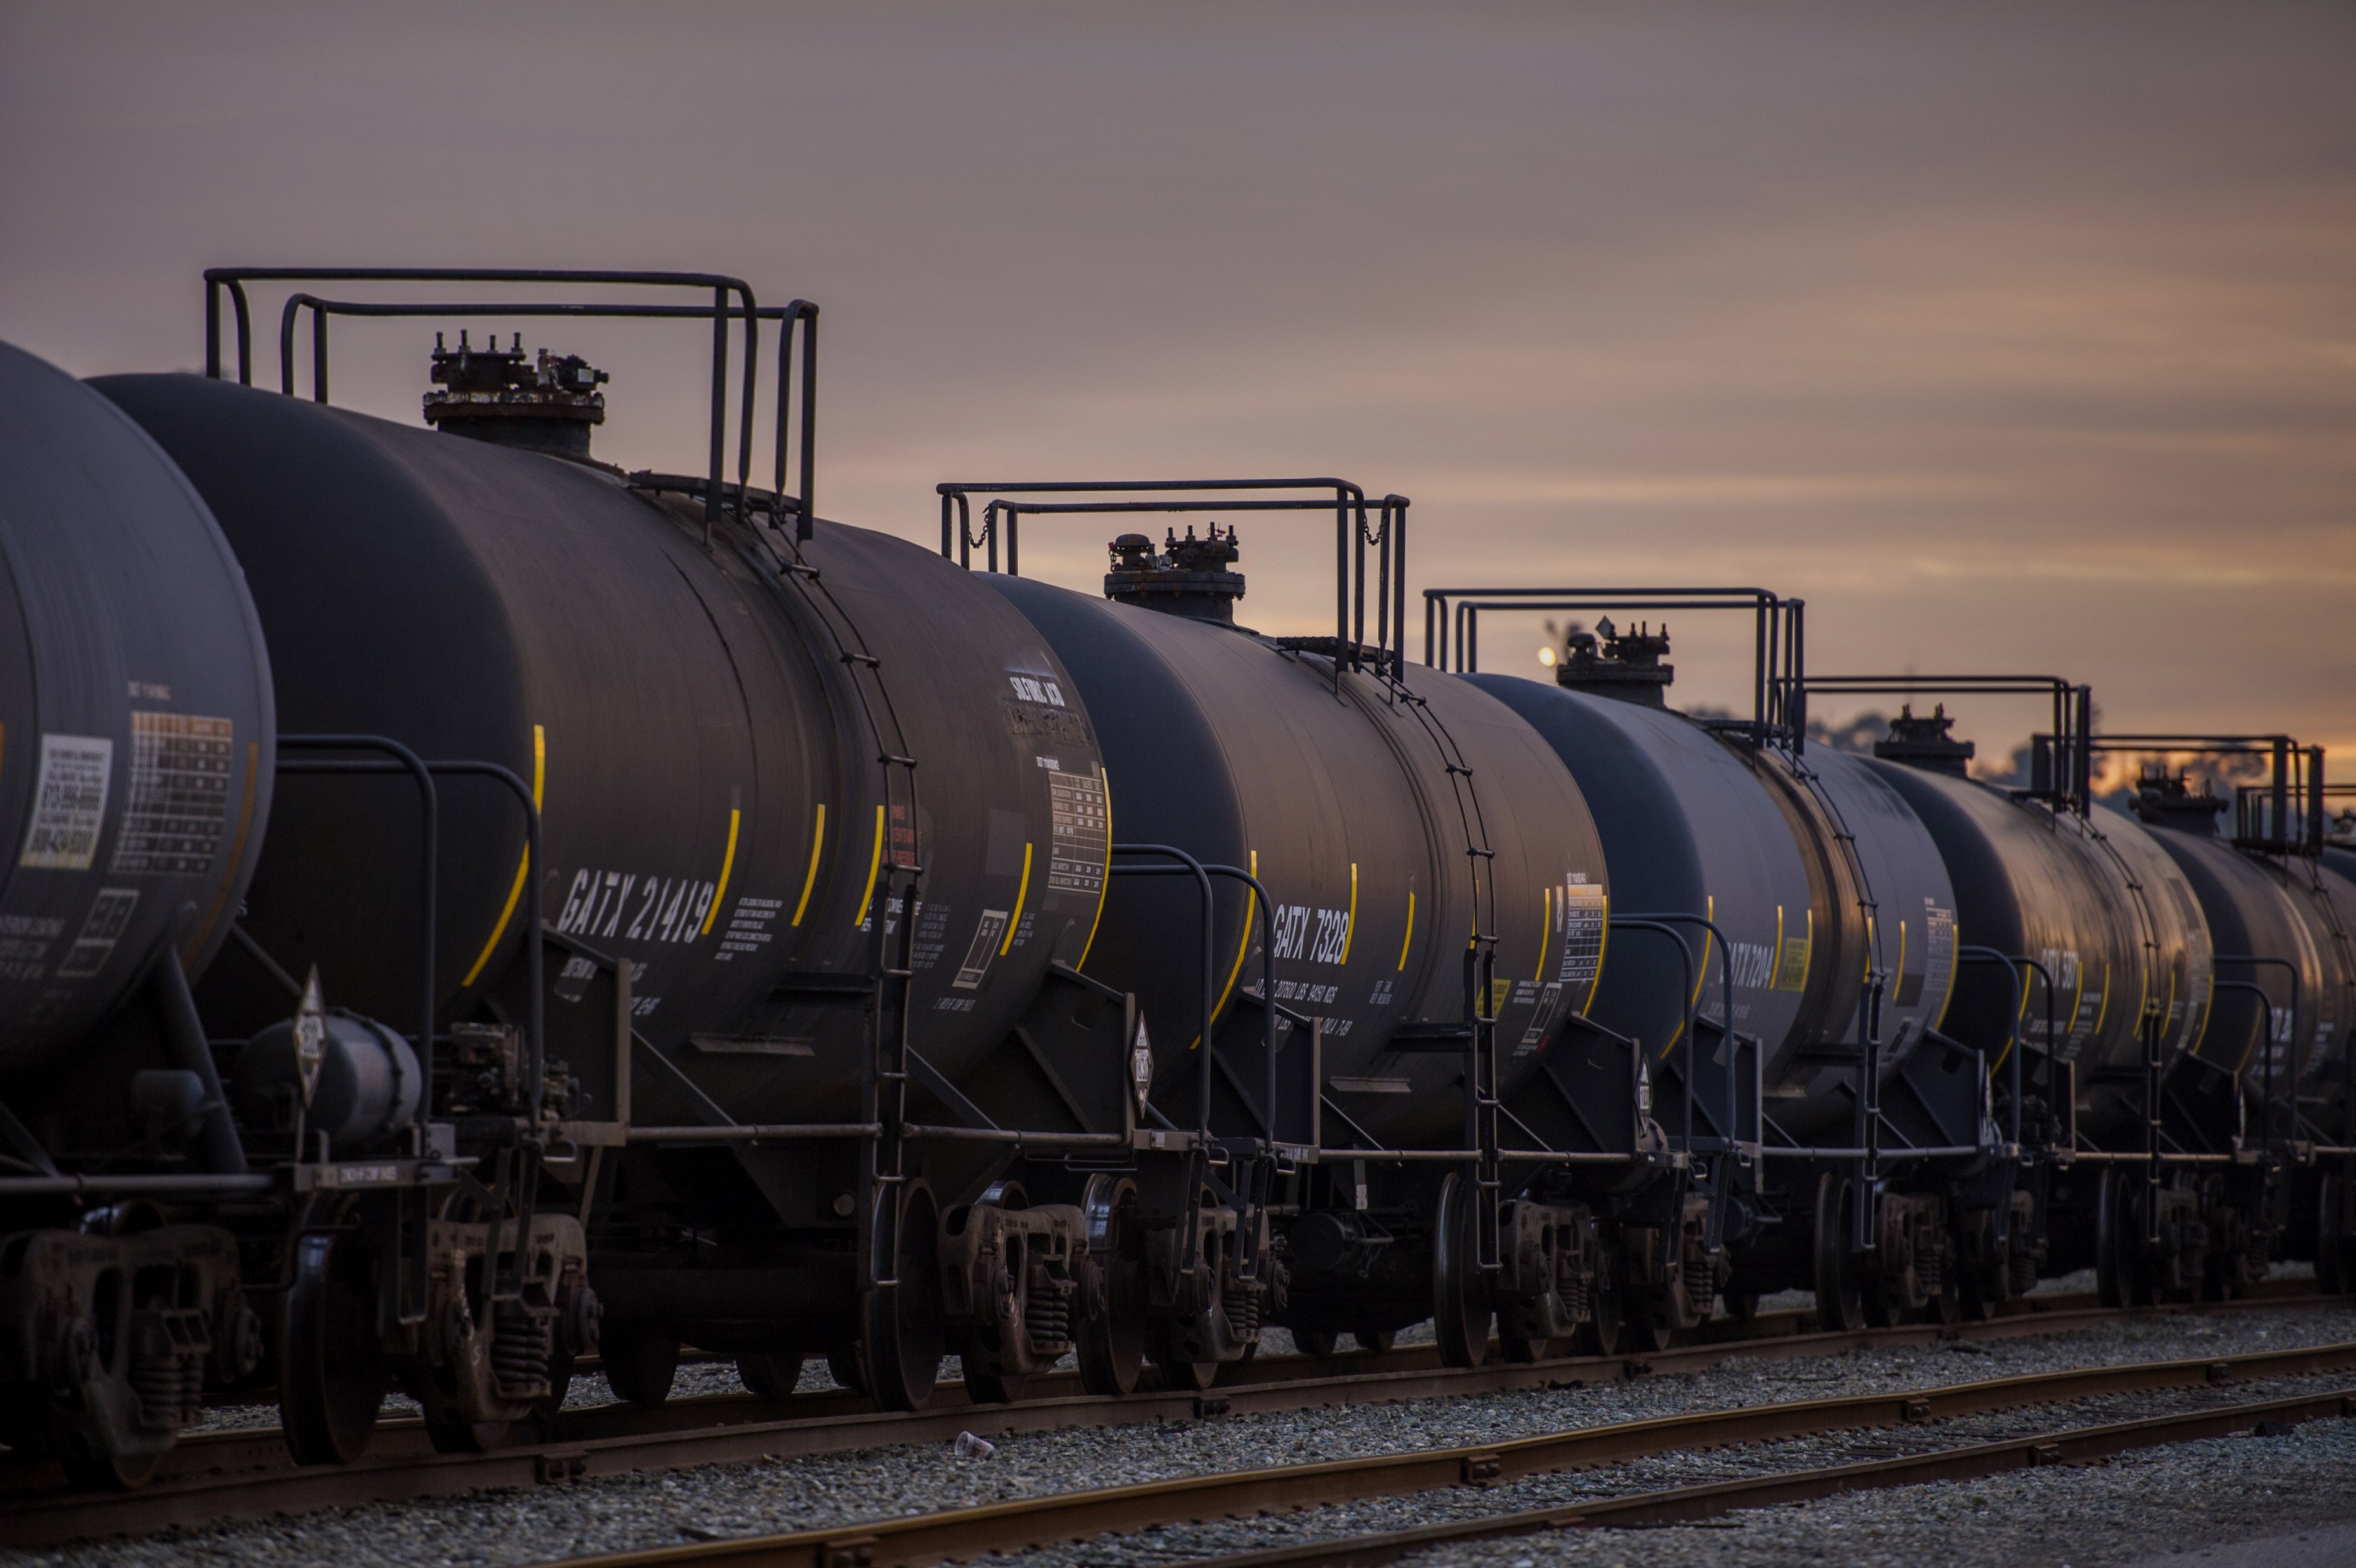 Oil tankers sit at a rail yard at the Kinder Morgan Inc. facility in Richmond, California, U.S., on Friday, Nov. 21, 2014. Crude-oil handling facilities at the end of rail lines from Albany, New York, to Richmond, California, are mired in lawsuits filed by community and environmental groups claiming they were kept in the dark about the projects.